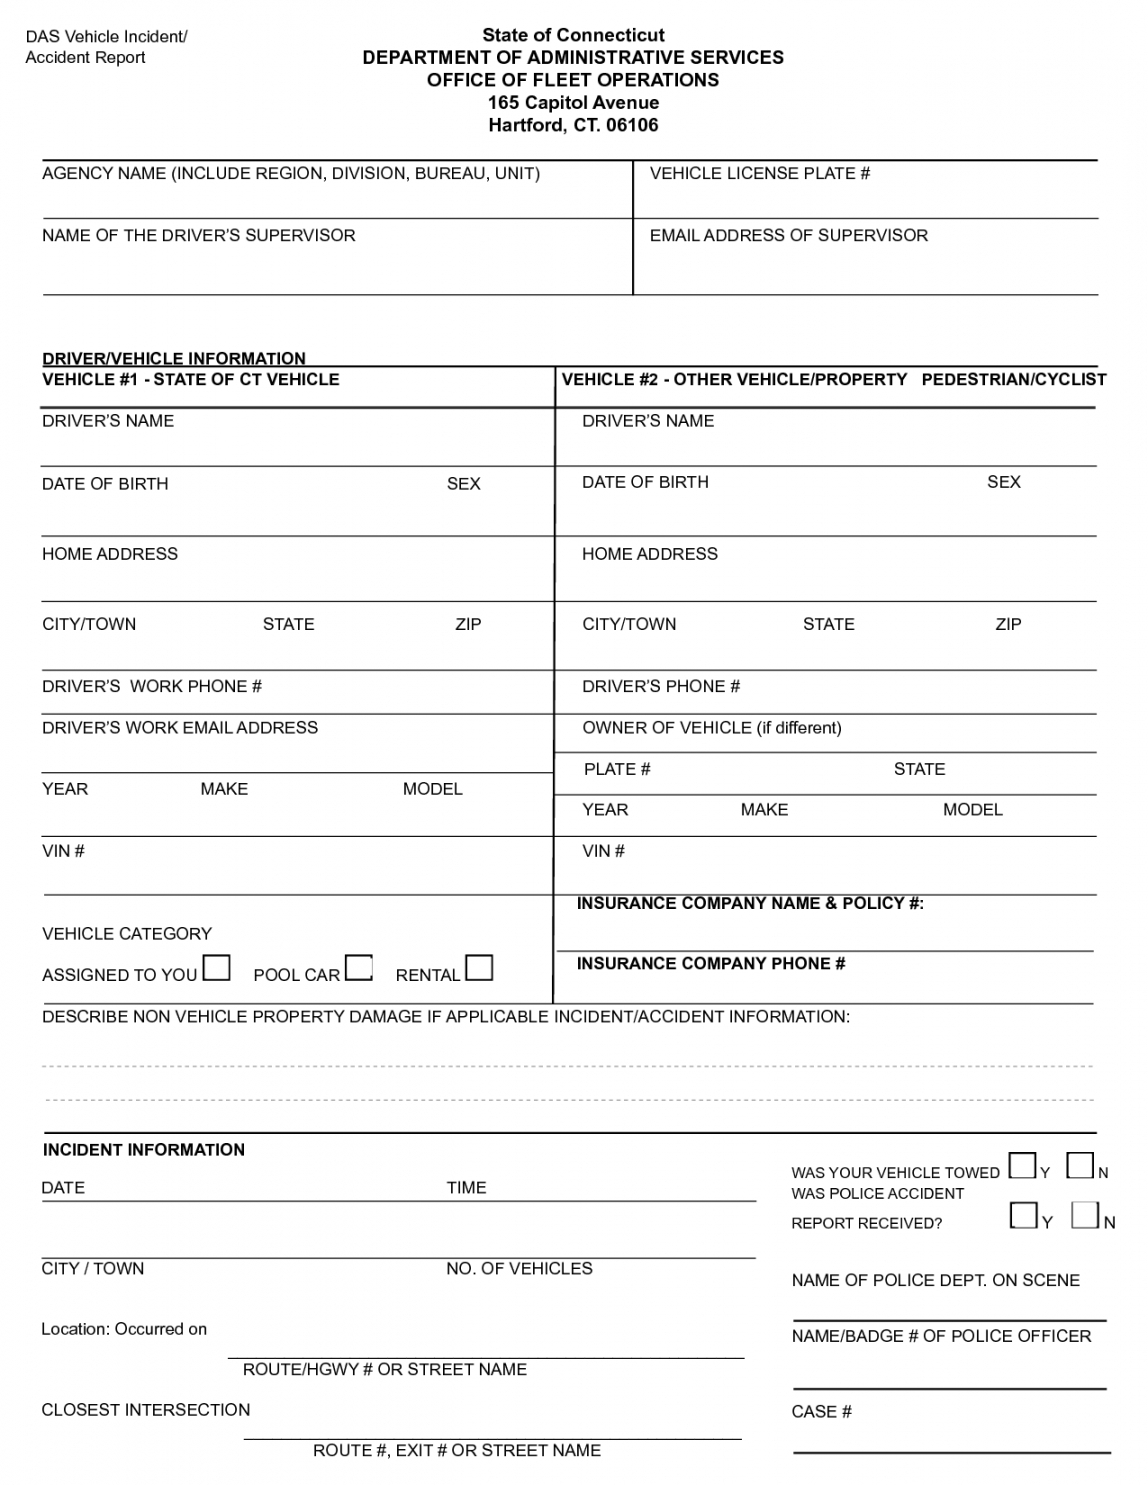 Vehicle Incident Report Template With Regard To Vehicle Accident Report Form Template